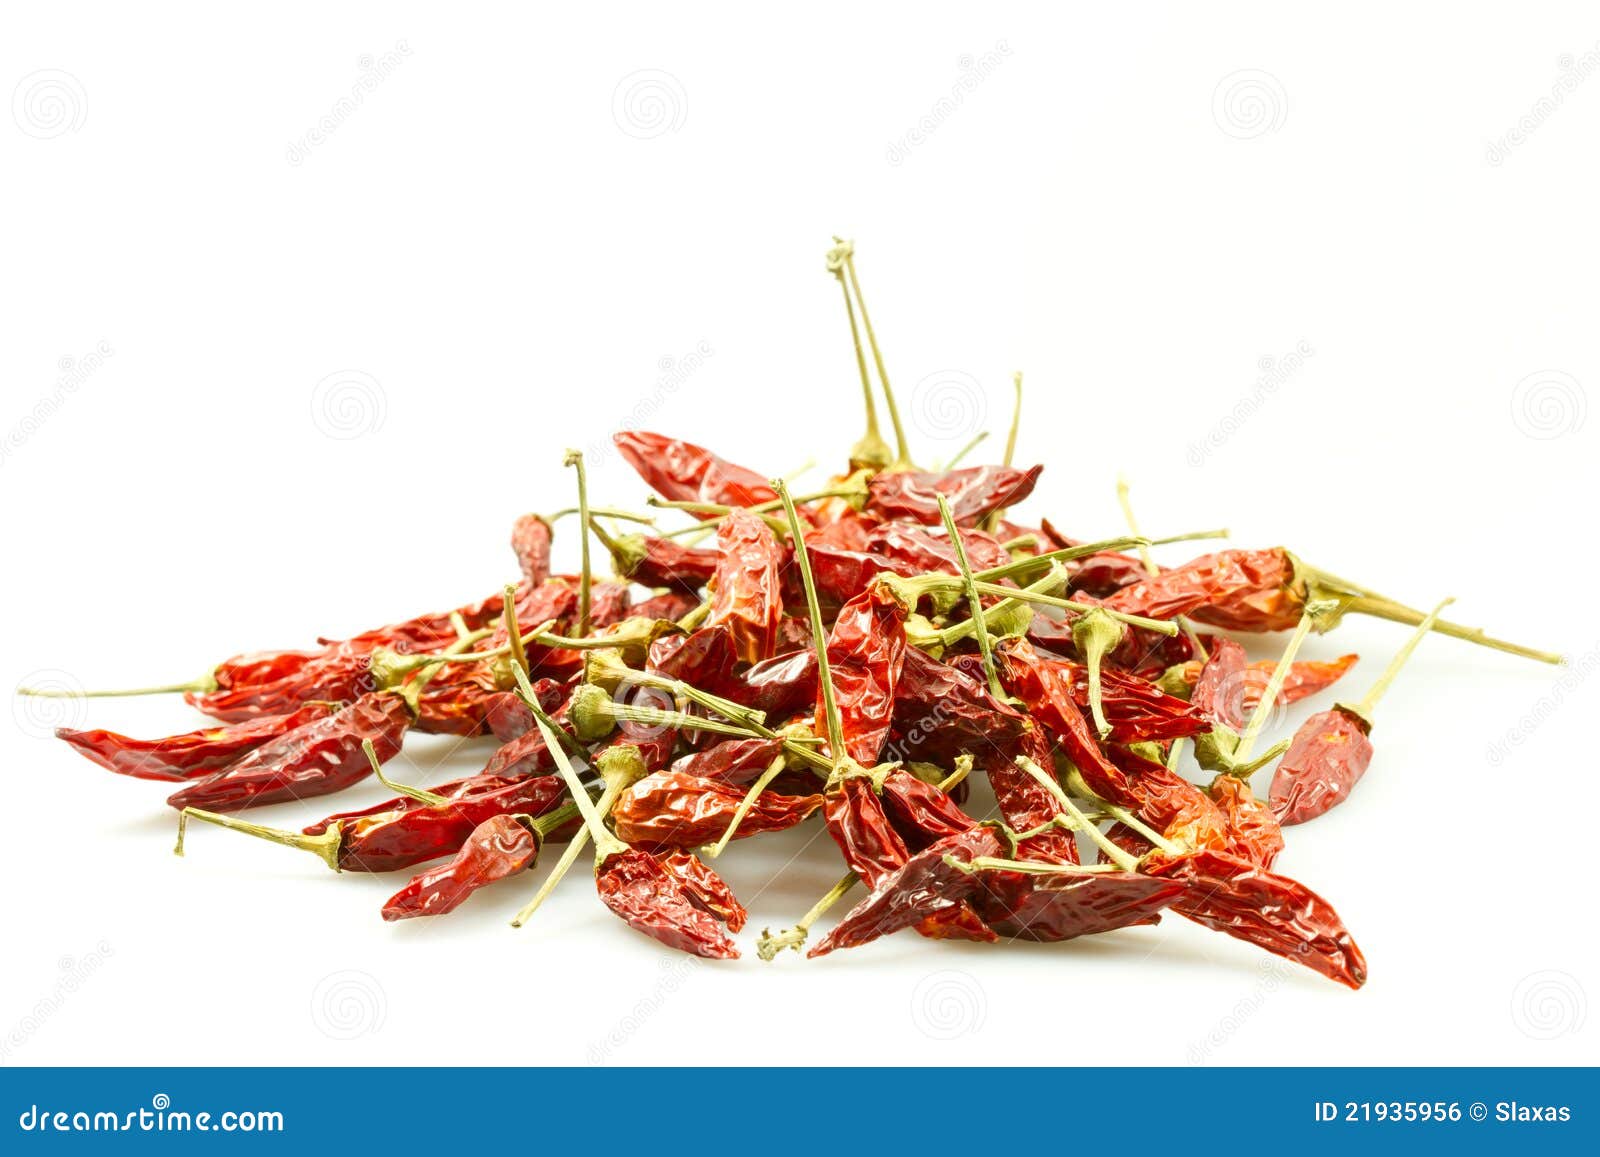 handful of dried red peppers isolated on white background